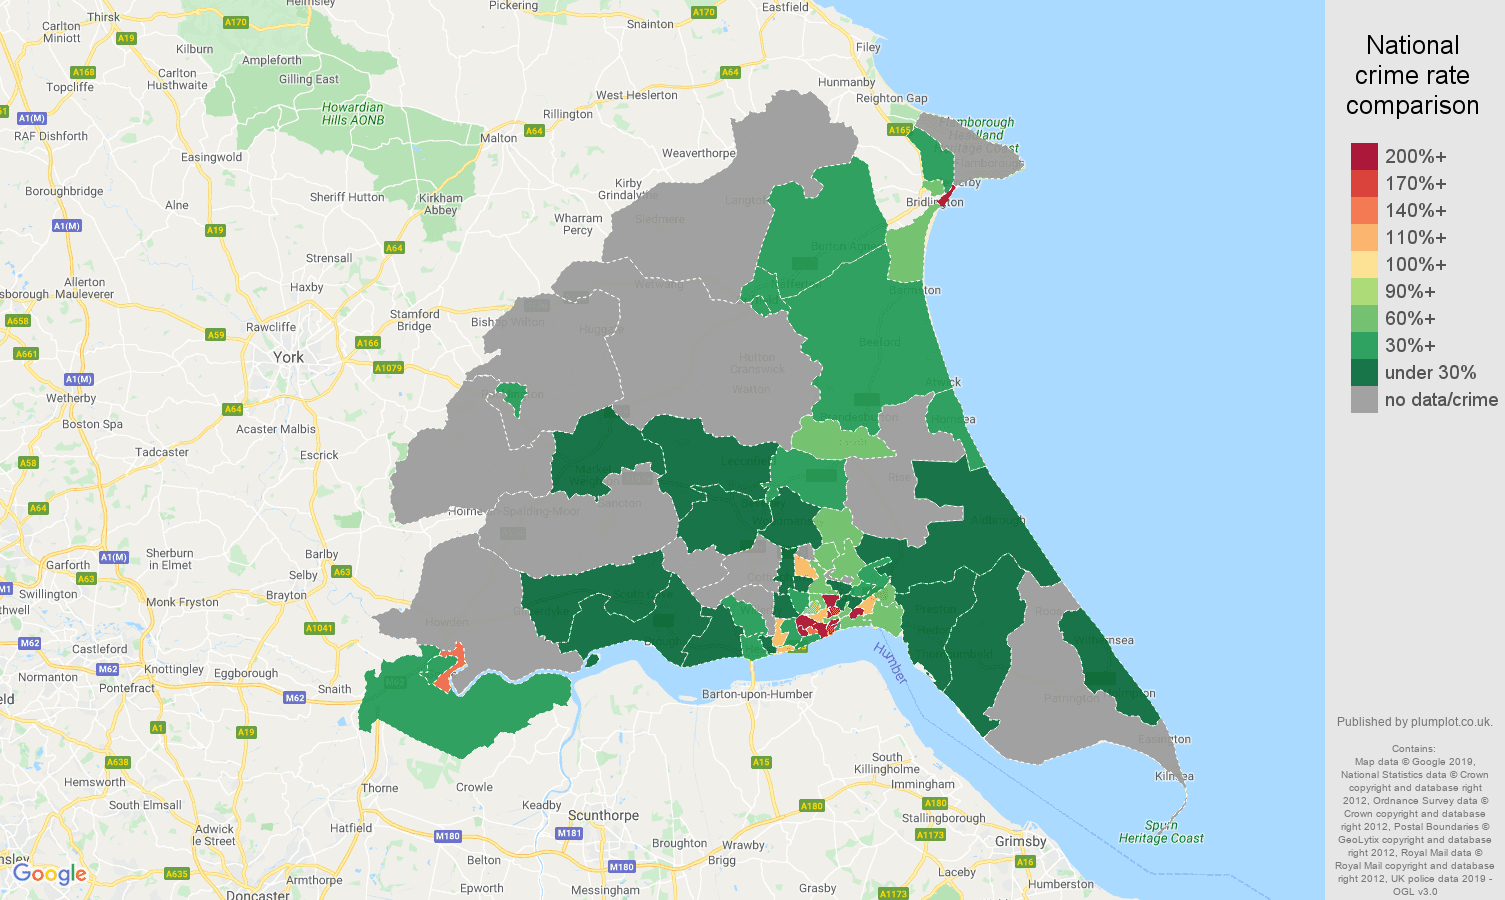 East Riding of Yorkshire possession of weapons crime rate comparison map